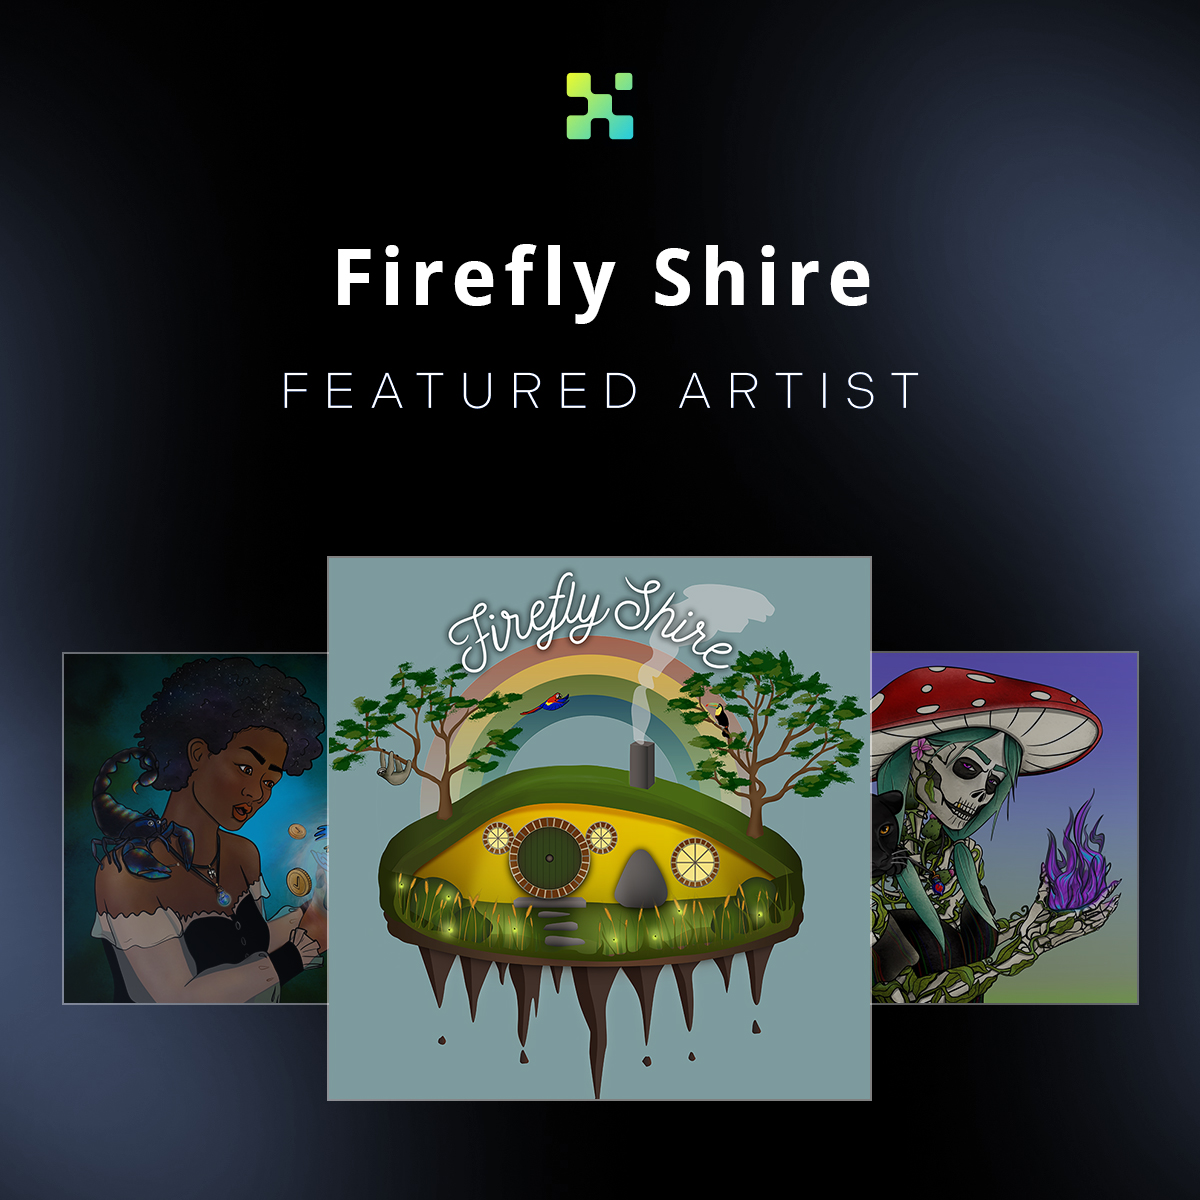 Firefly Shire